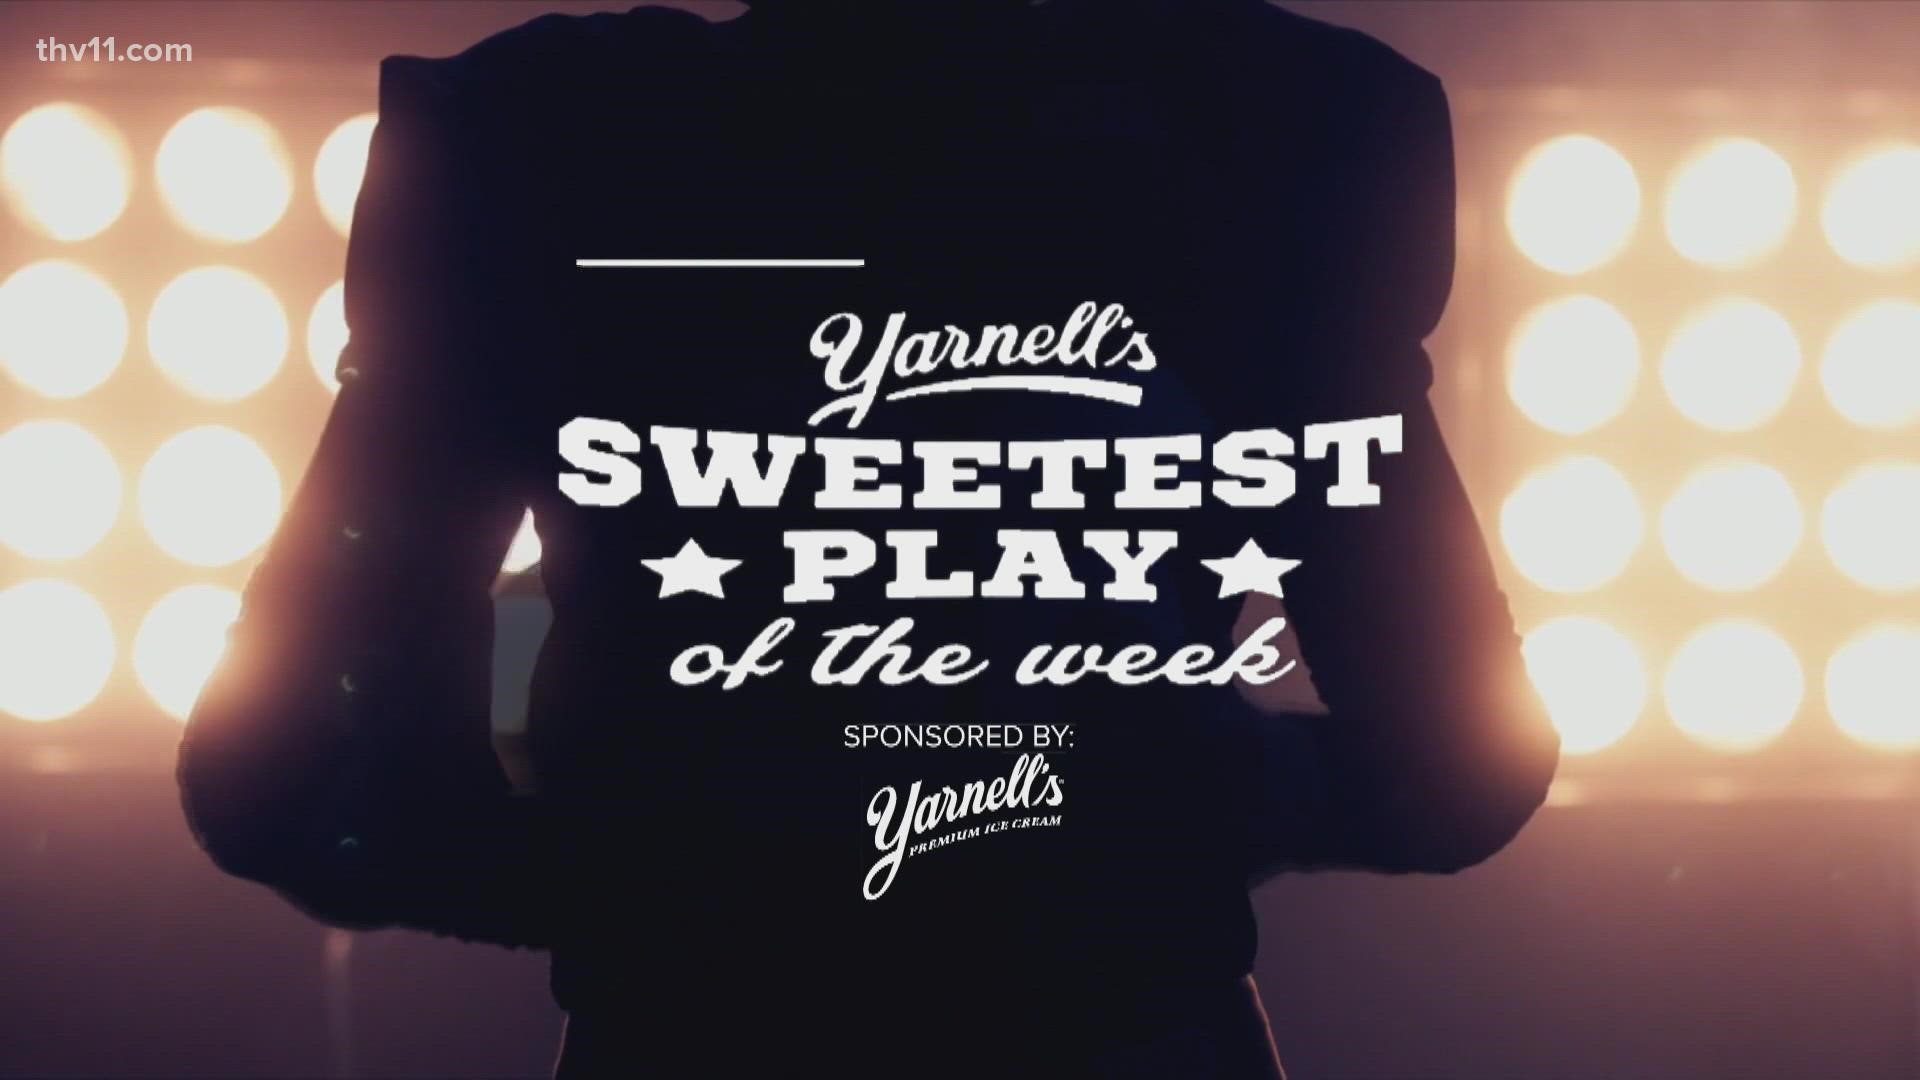 With the return of high school football in Arkansas comes the return of Yarnell's Sweetest Play of the Week!